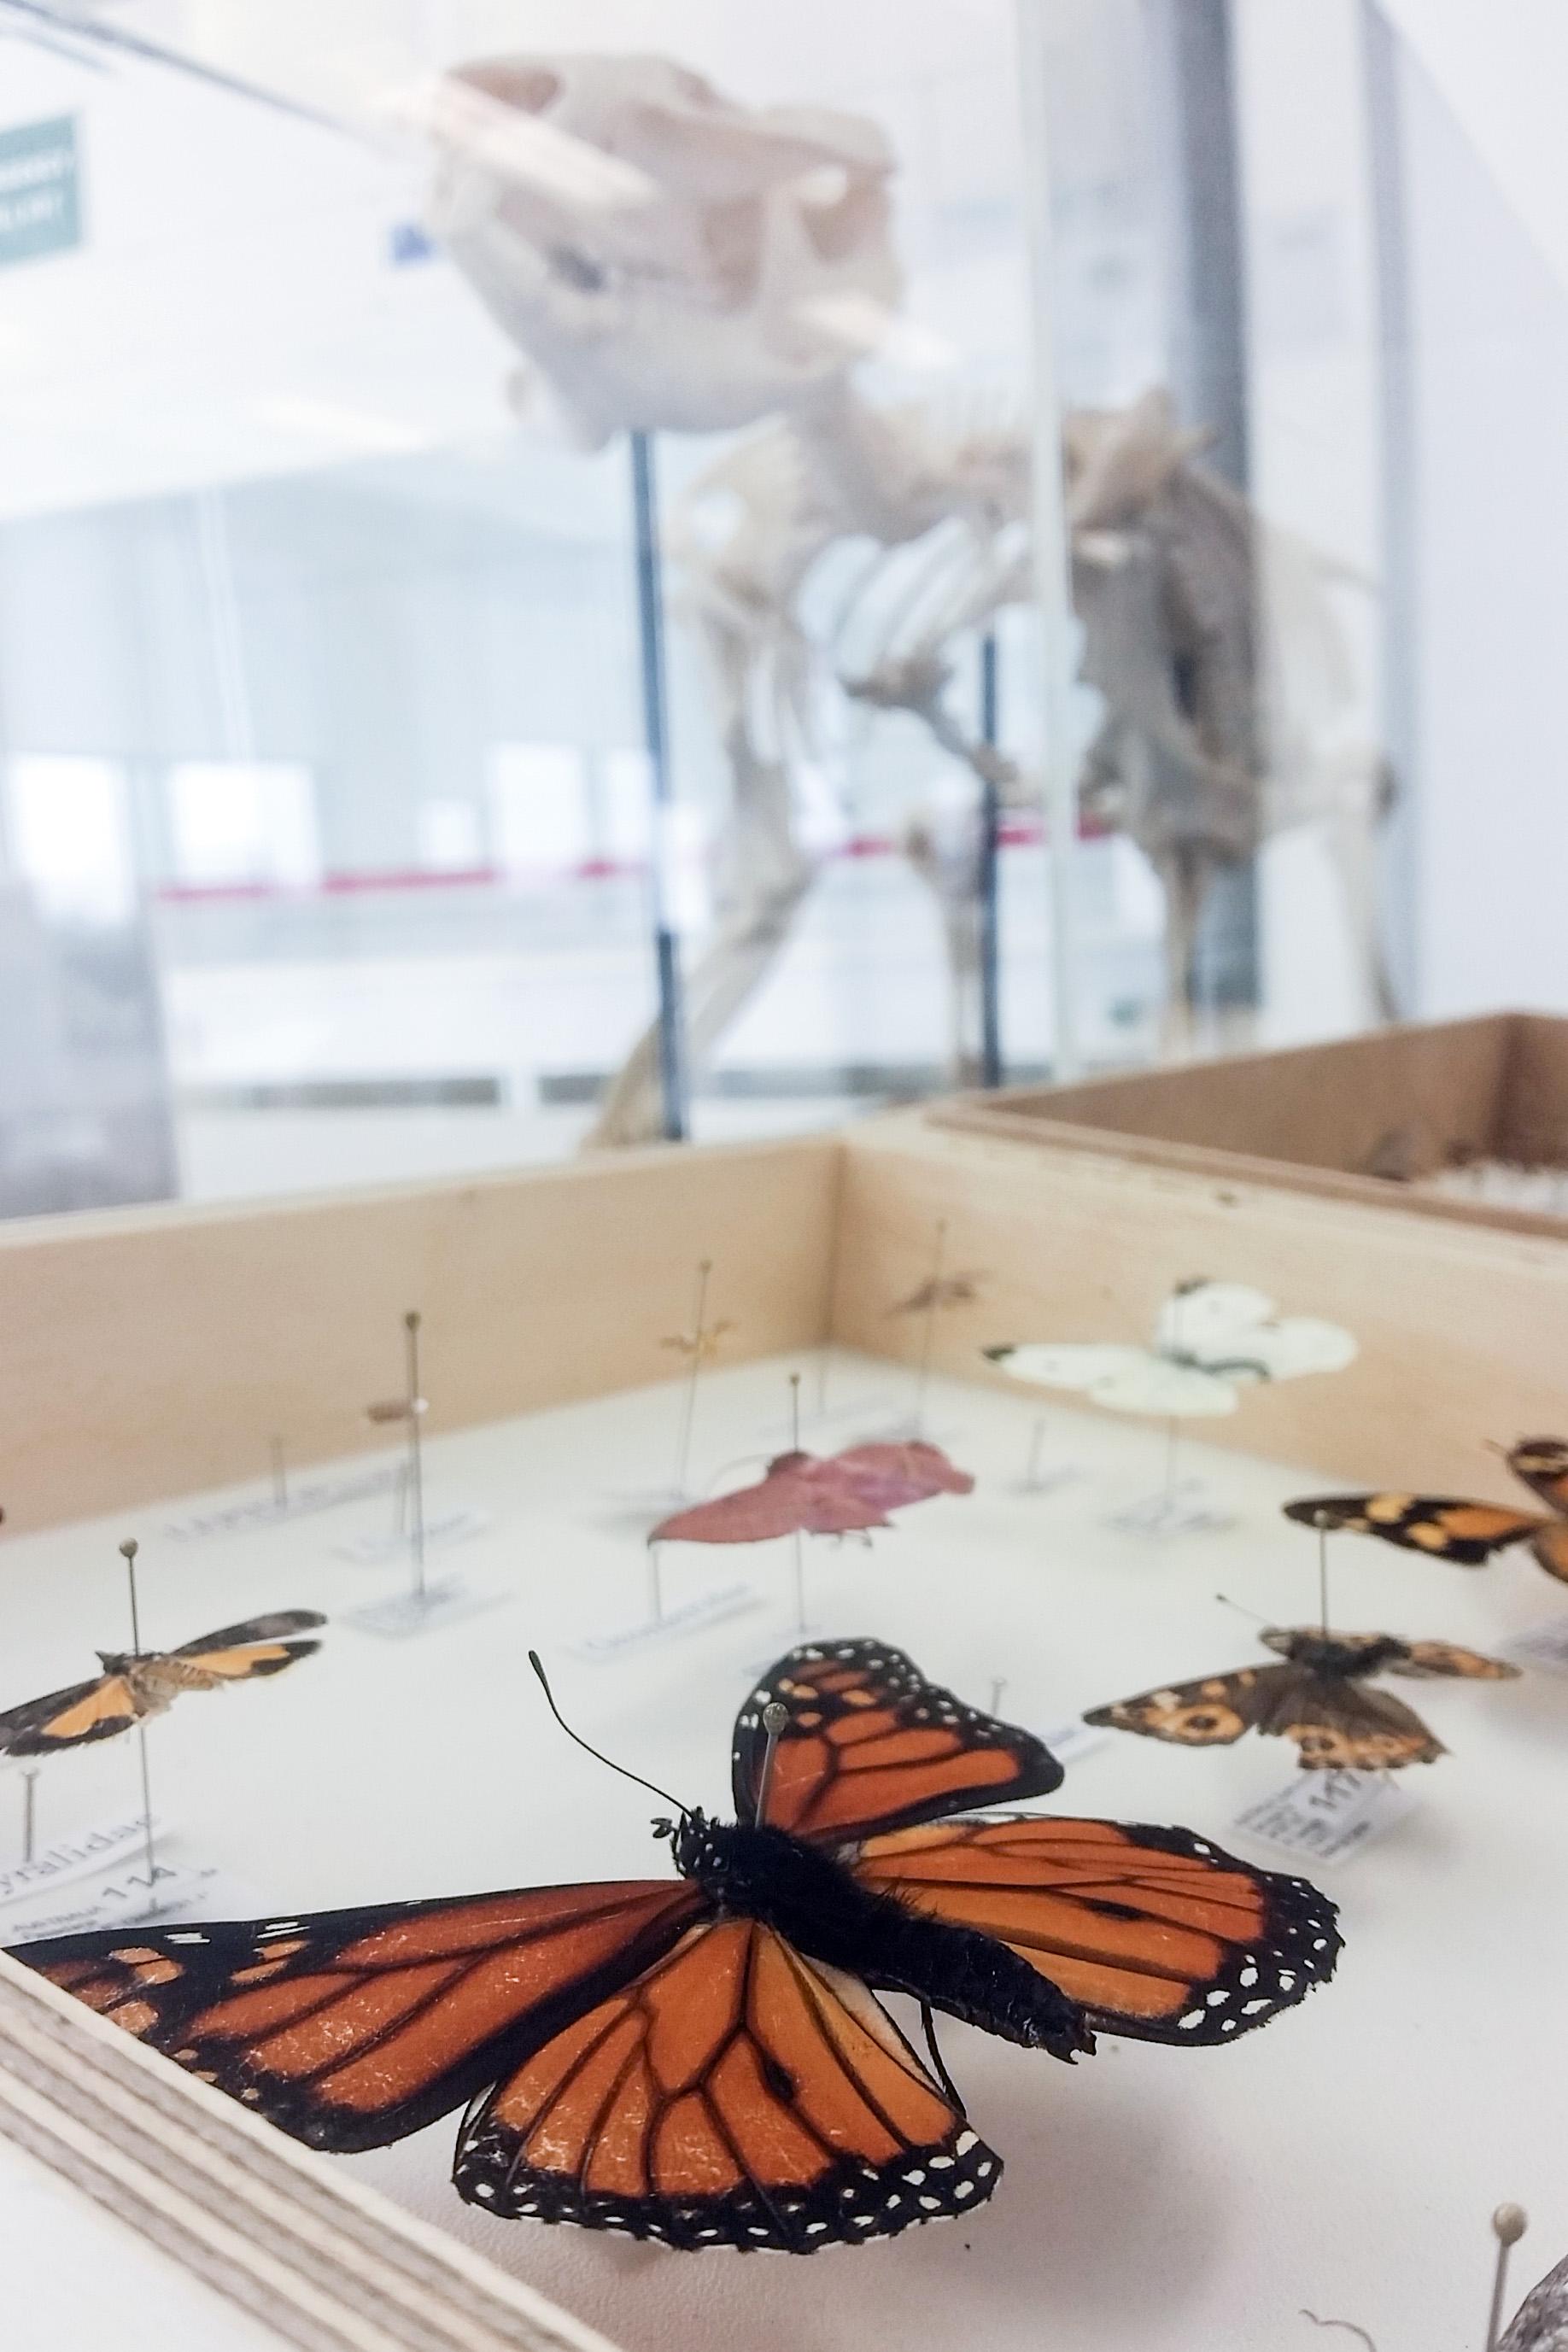 Braggs insect collection